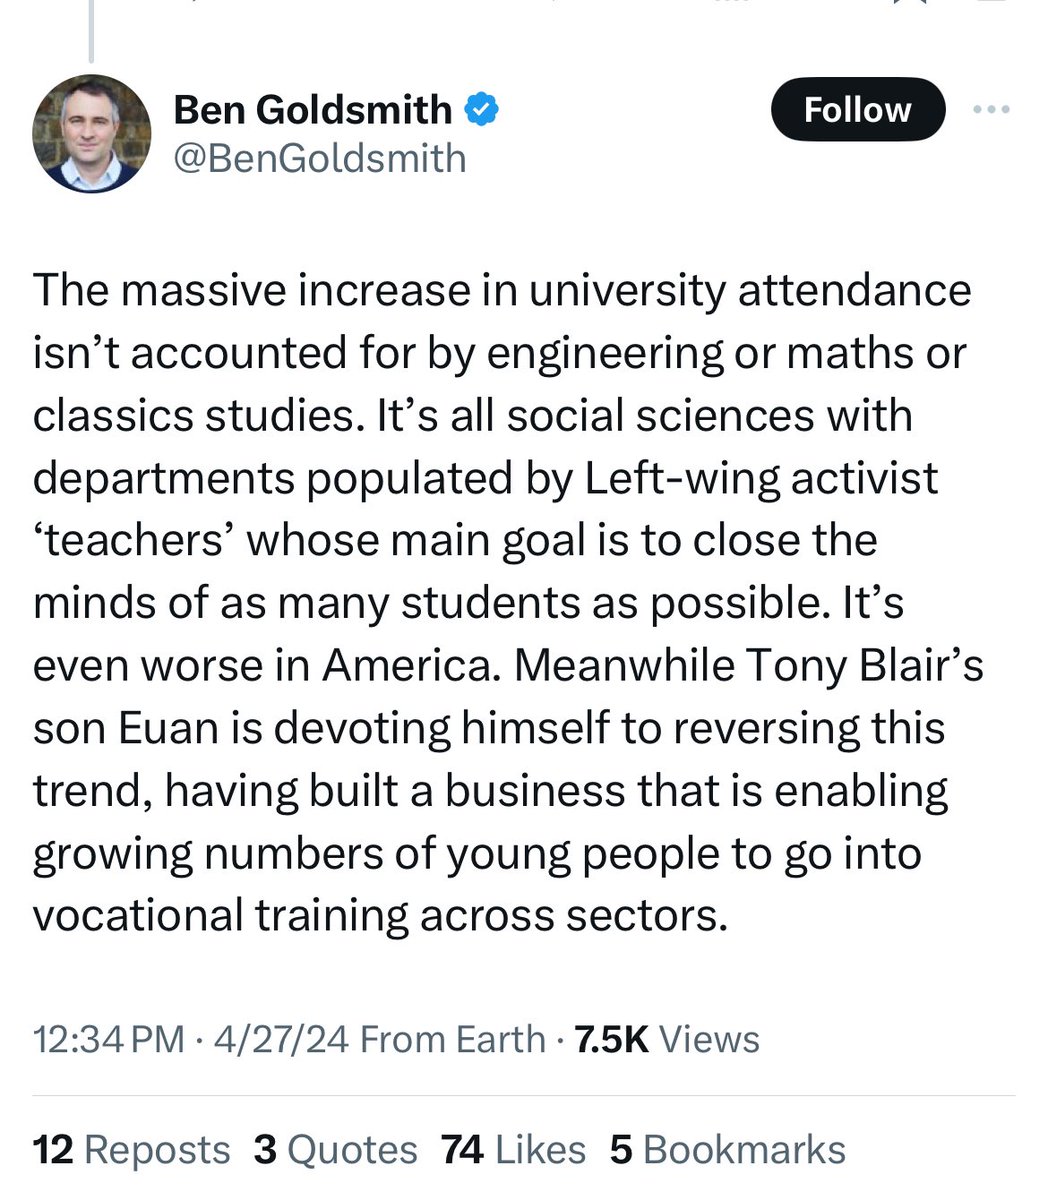 Son of a billionaire Eton educated Didn’t go to university First job at a private client stockbroker Complains “too many young people” go to university - how dare the plebs get an education! Claims goal of university is to “close minds” 🙄